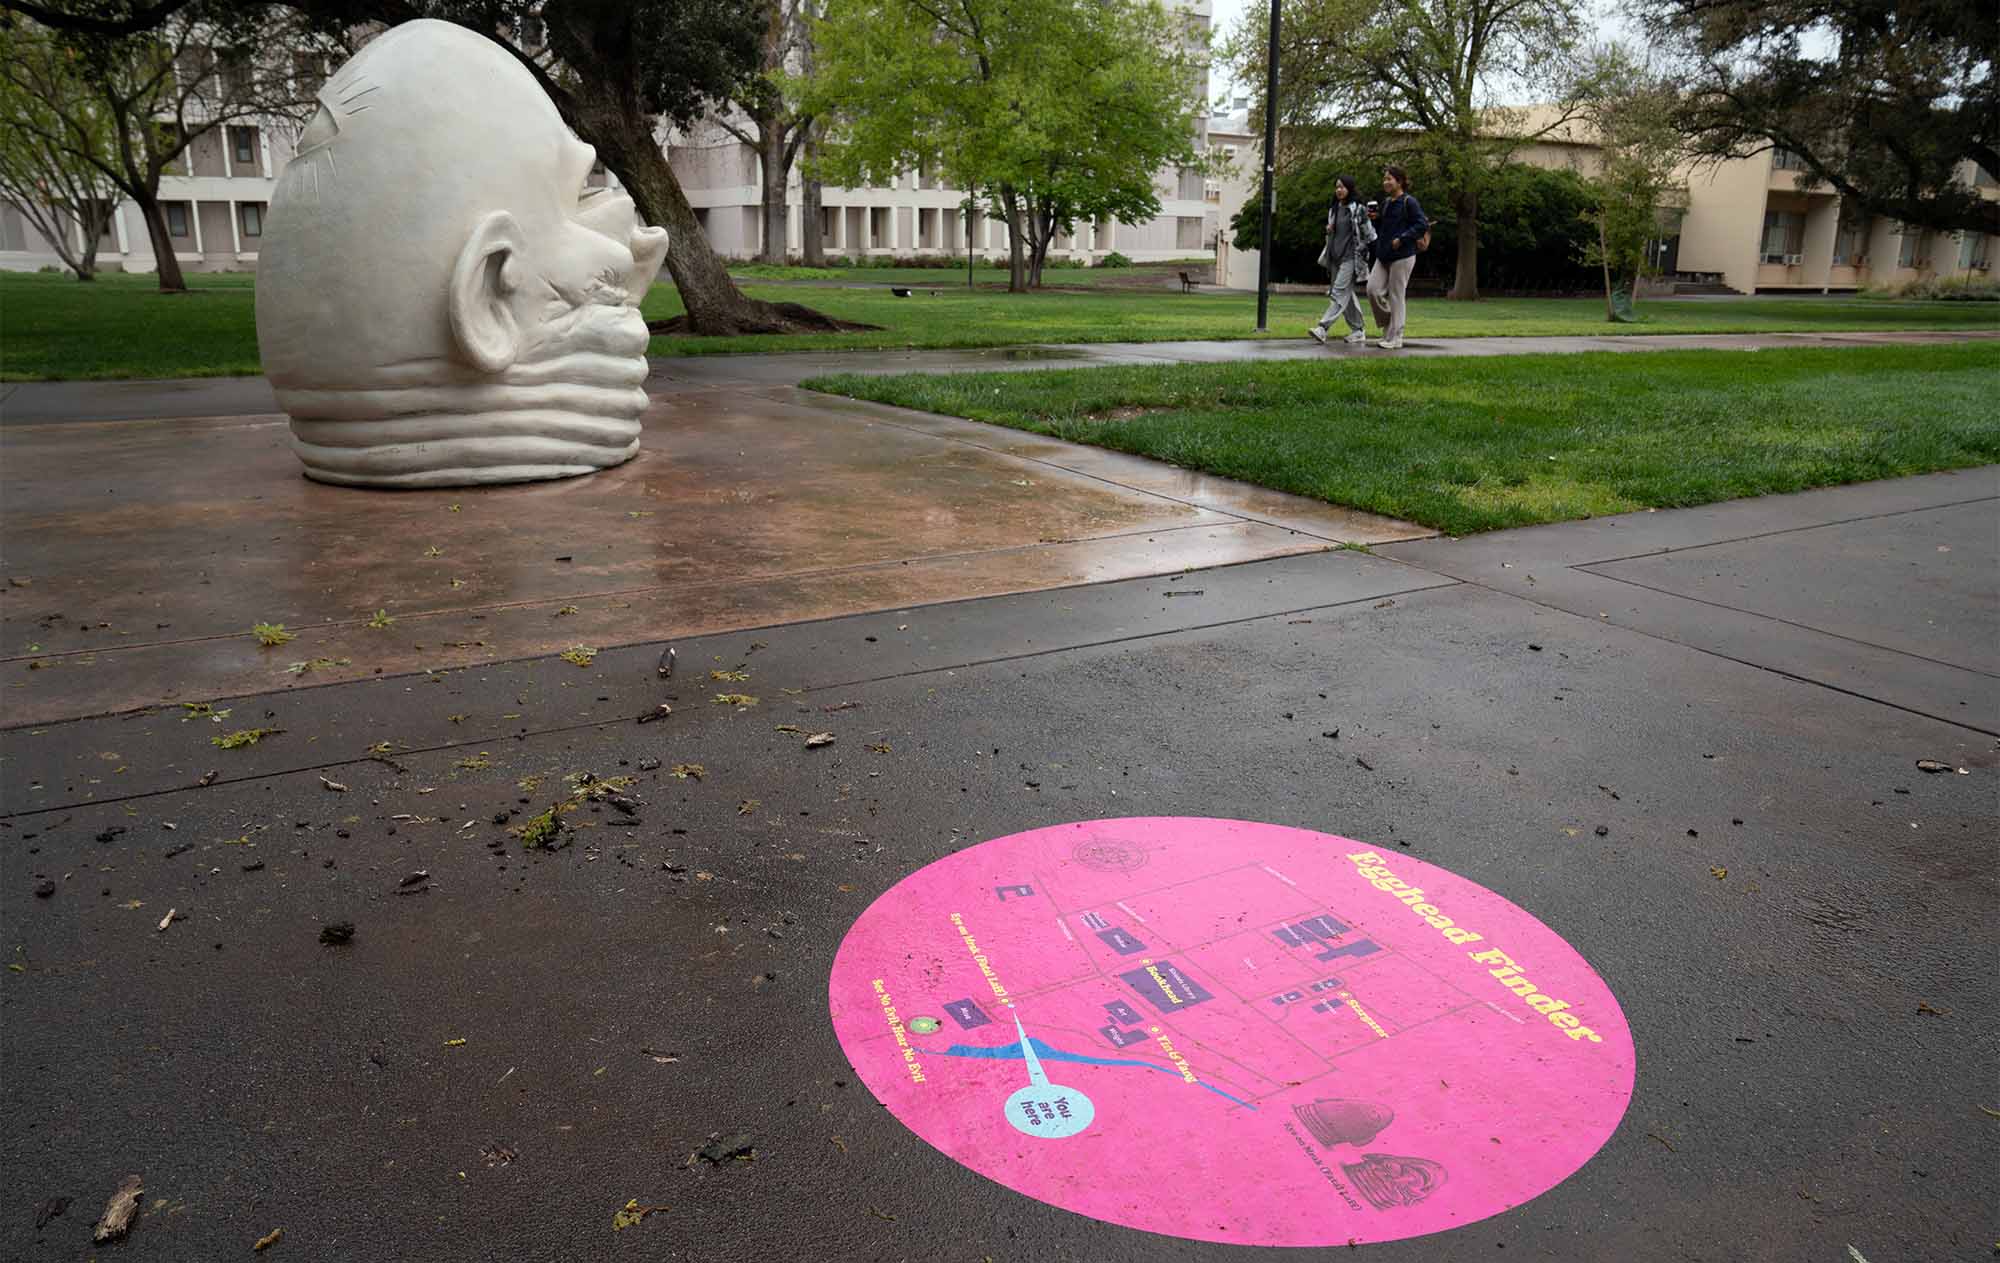 Decal on ground shows map of Egghead locations